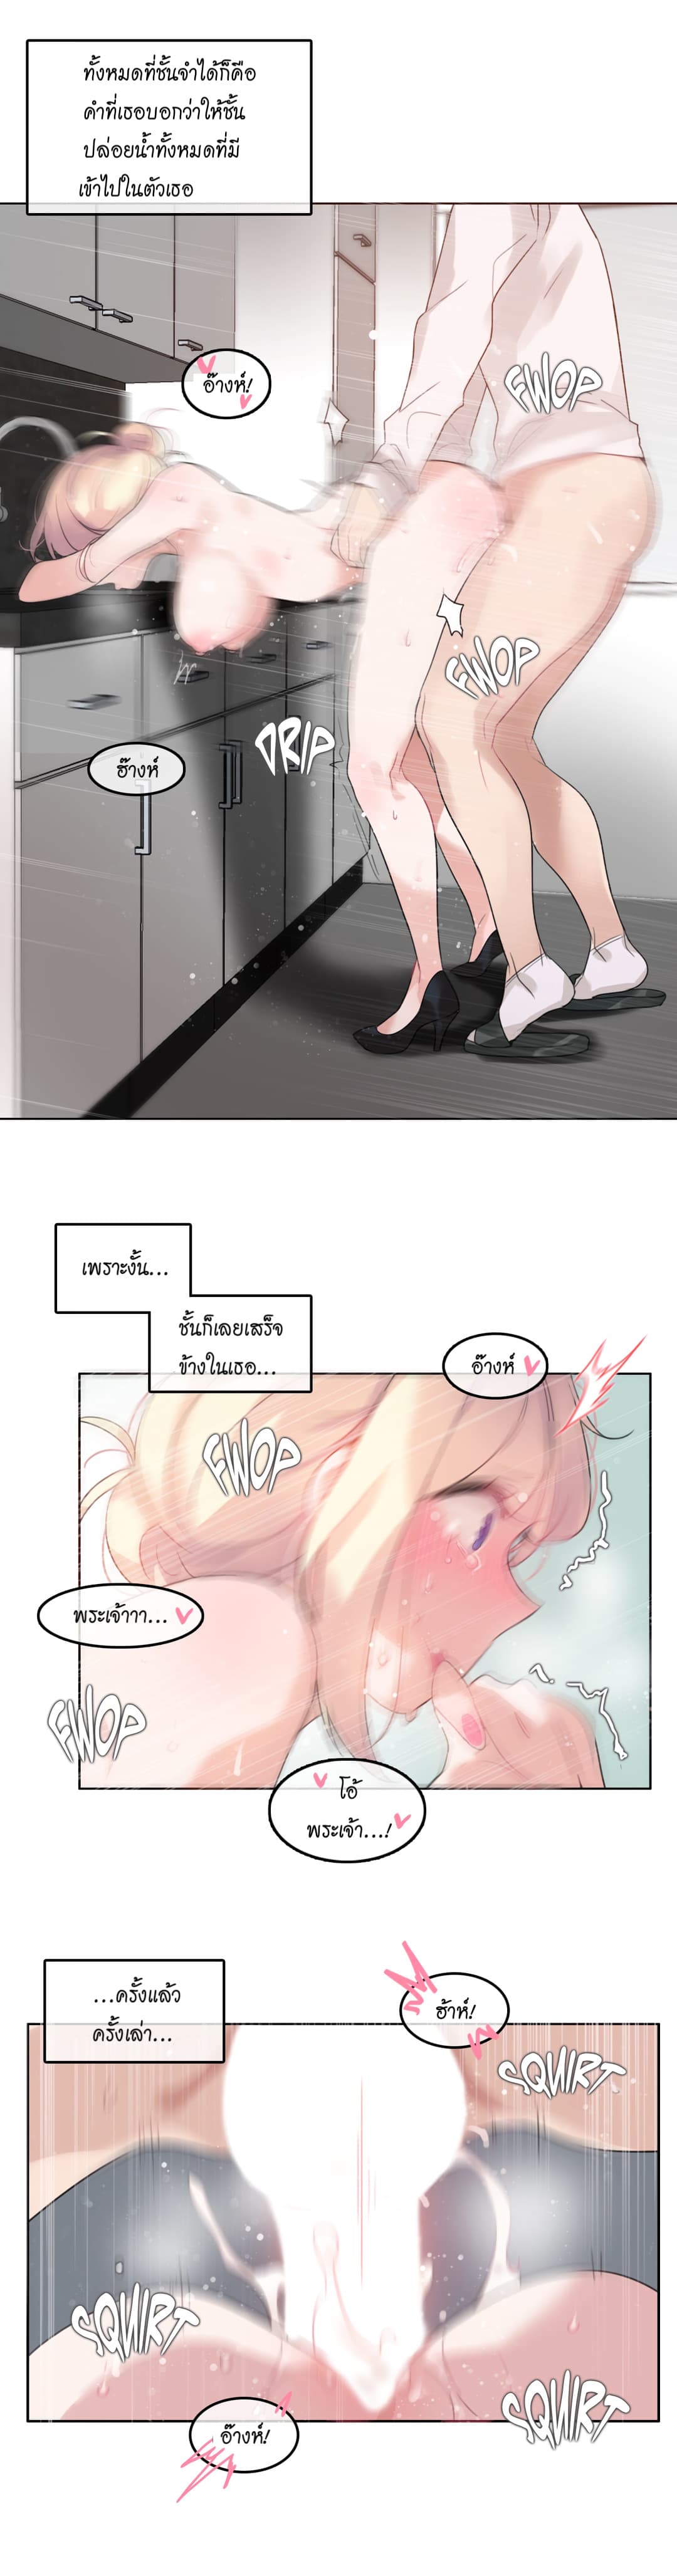 A Pervert’s Daily Life 33 (18)